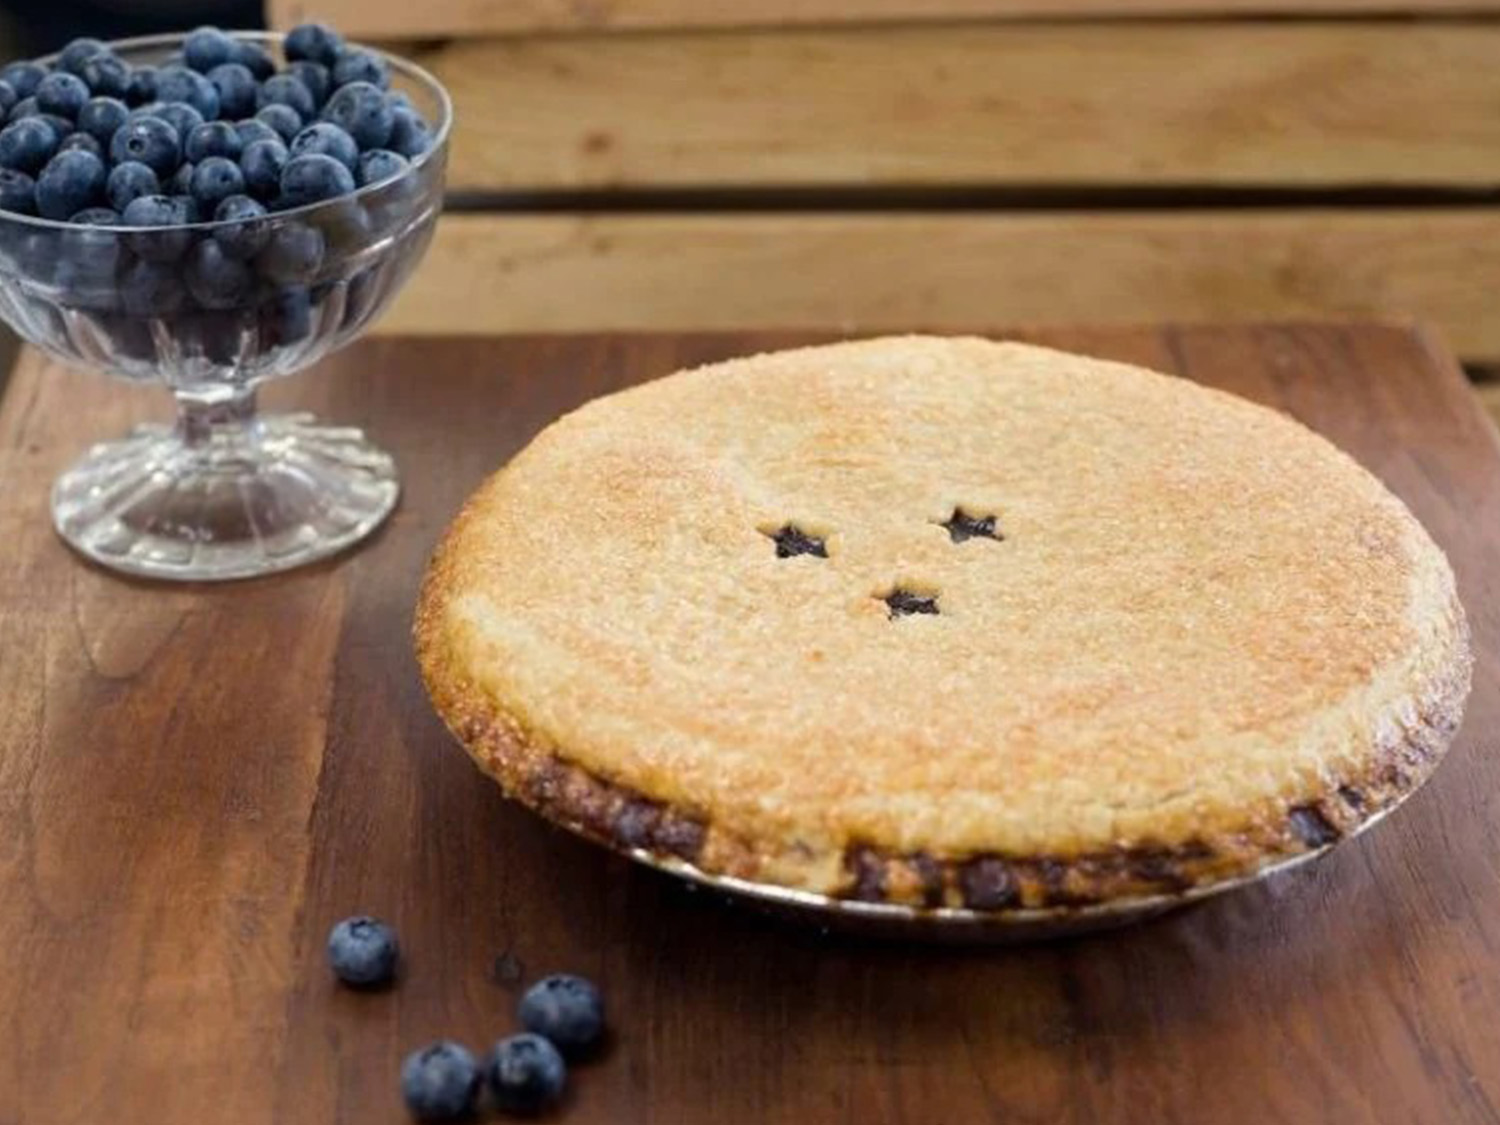 Latest News - Get Your Red, White and Blue Pies for Fourth of July